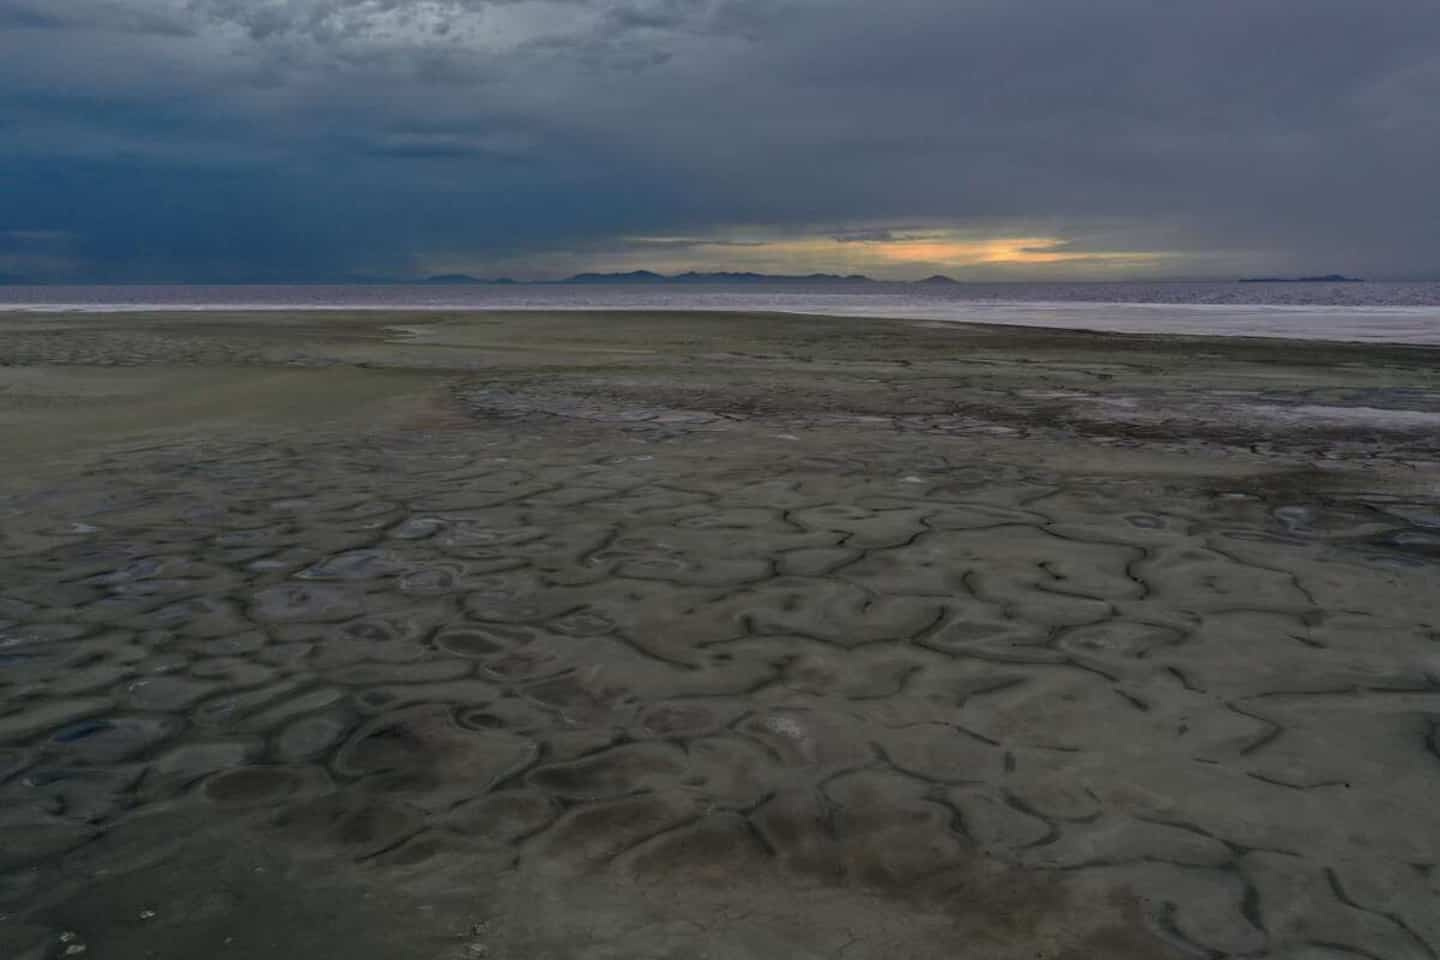 Drought in the United States: the Great Salt Lake of Utah at an all-time low